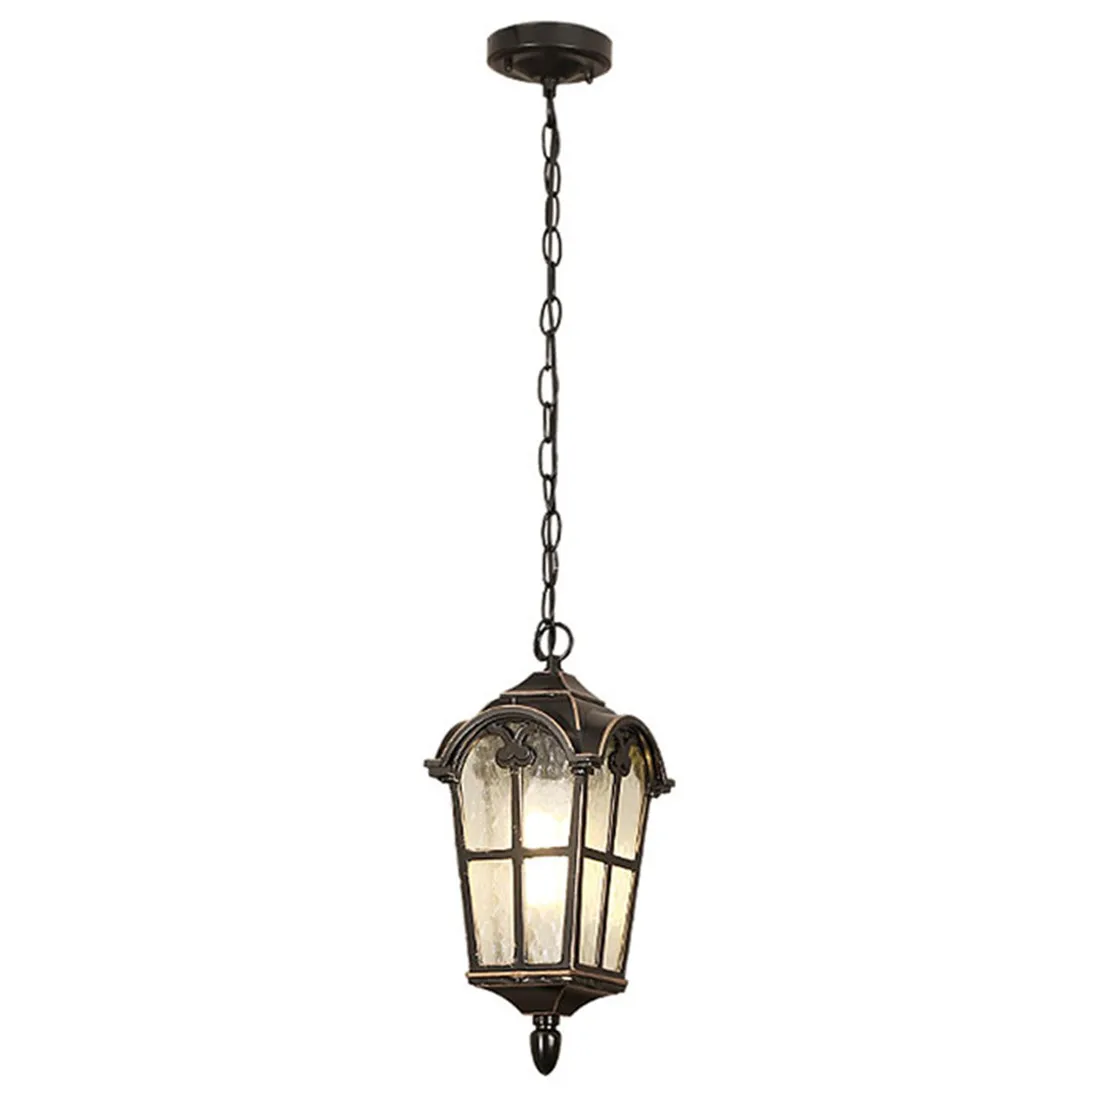 Black Small Medium Big 3 Sizes  Outdoor Pendant Lantern, Exterior Pendant Hanging Lights with Glass Shade for Porch Lamp